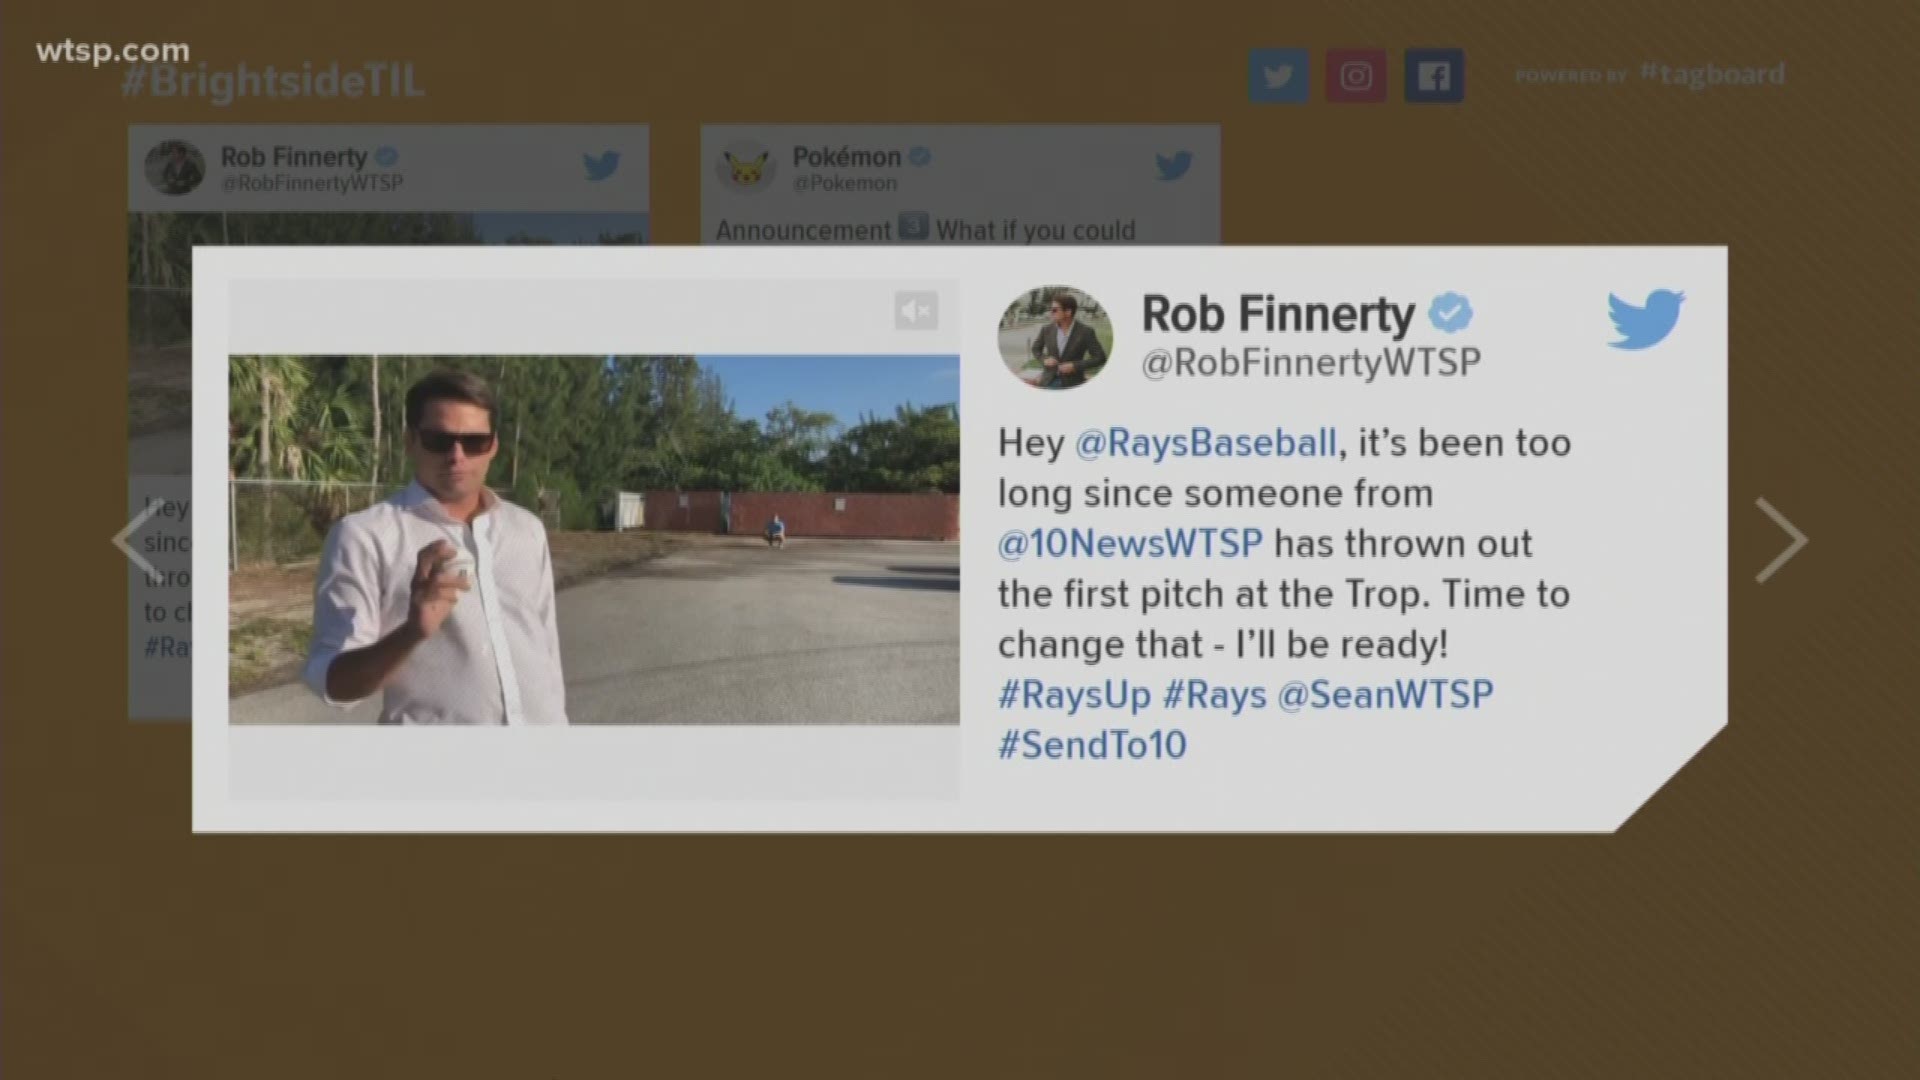 The Tampa Bay Rays say if Rob Finnerty can get 1,000 retweets on his video, the first pitch is all his. https://on.wtsp.com/2wt9A5k